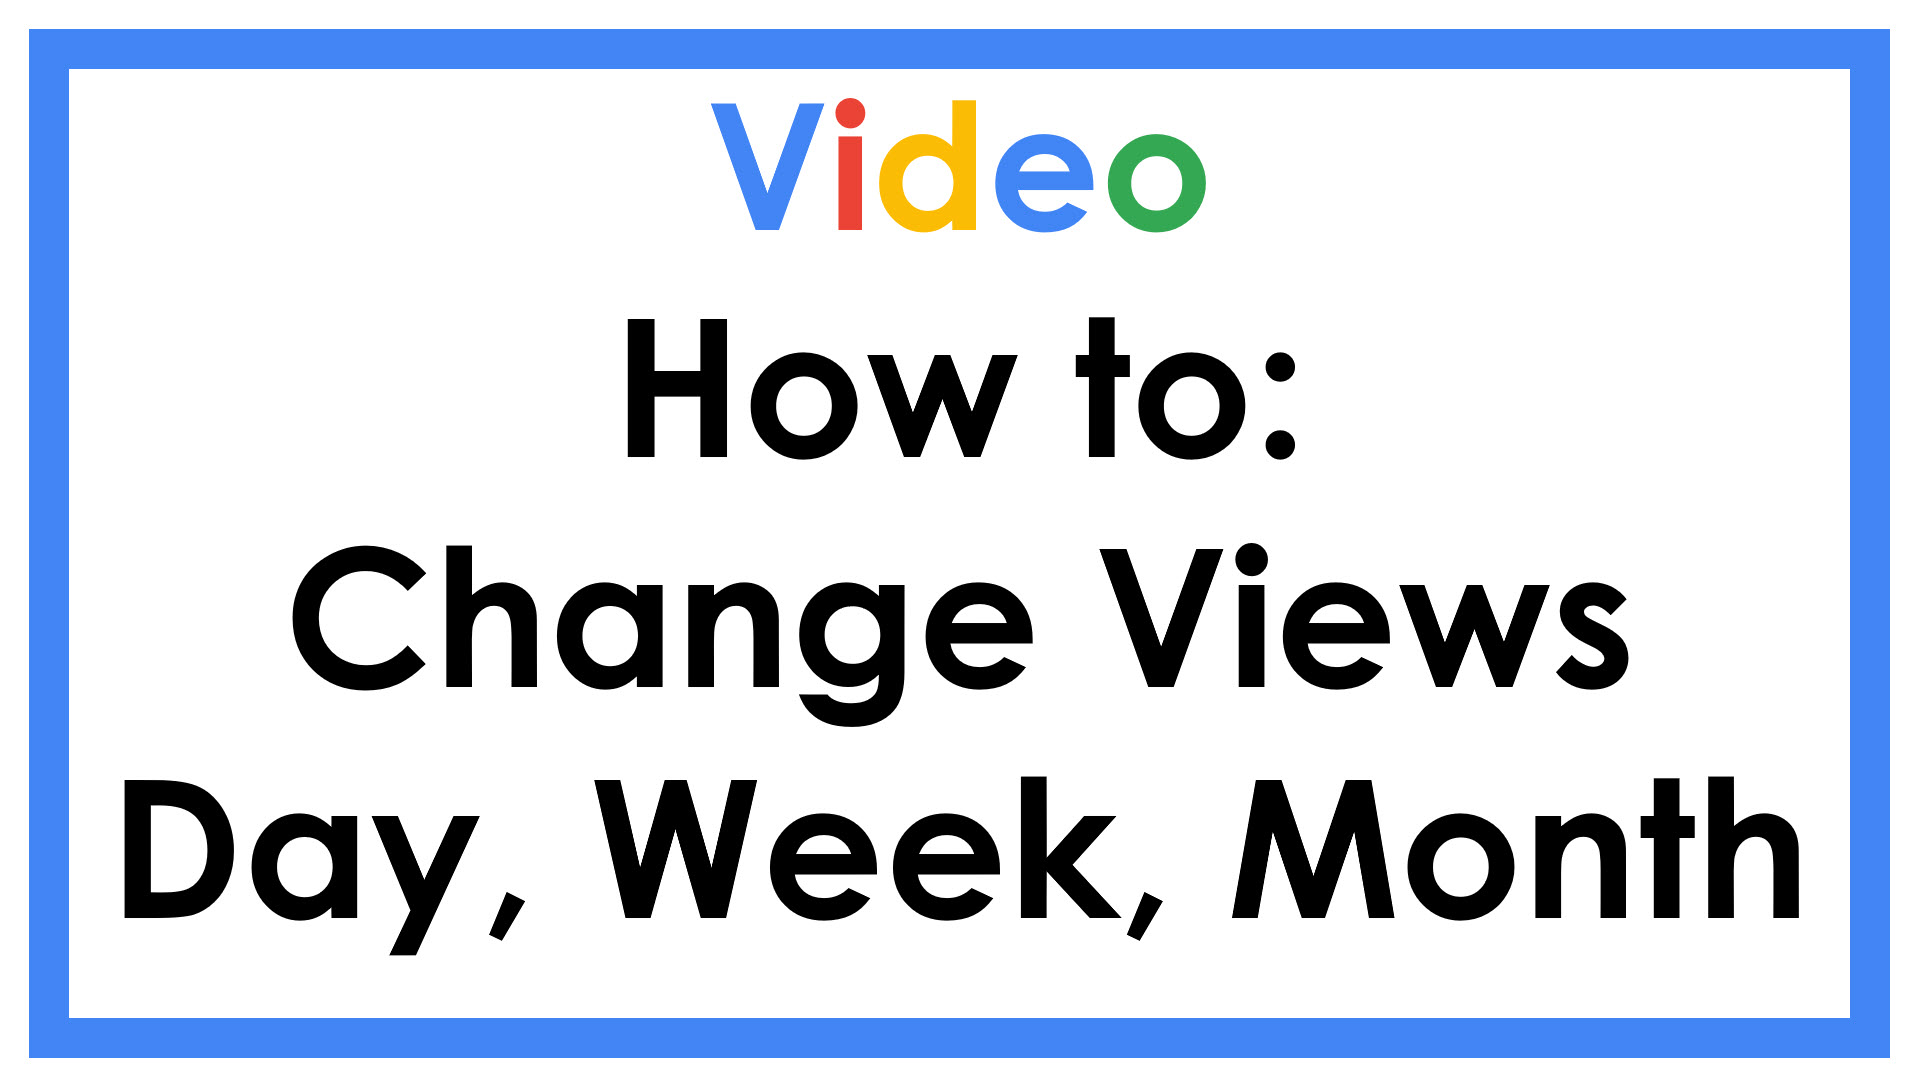 Video How To: Change Views Day, Week, Month